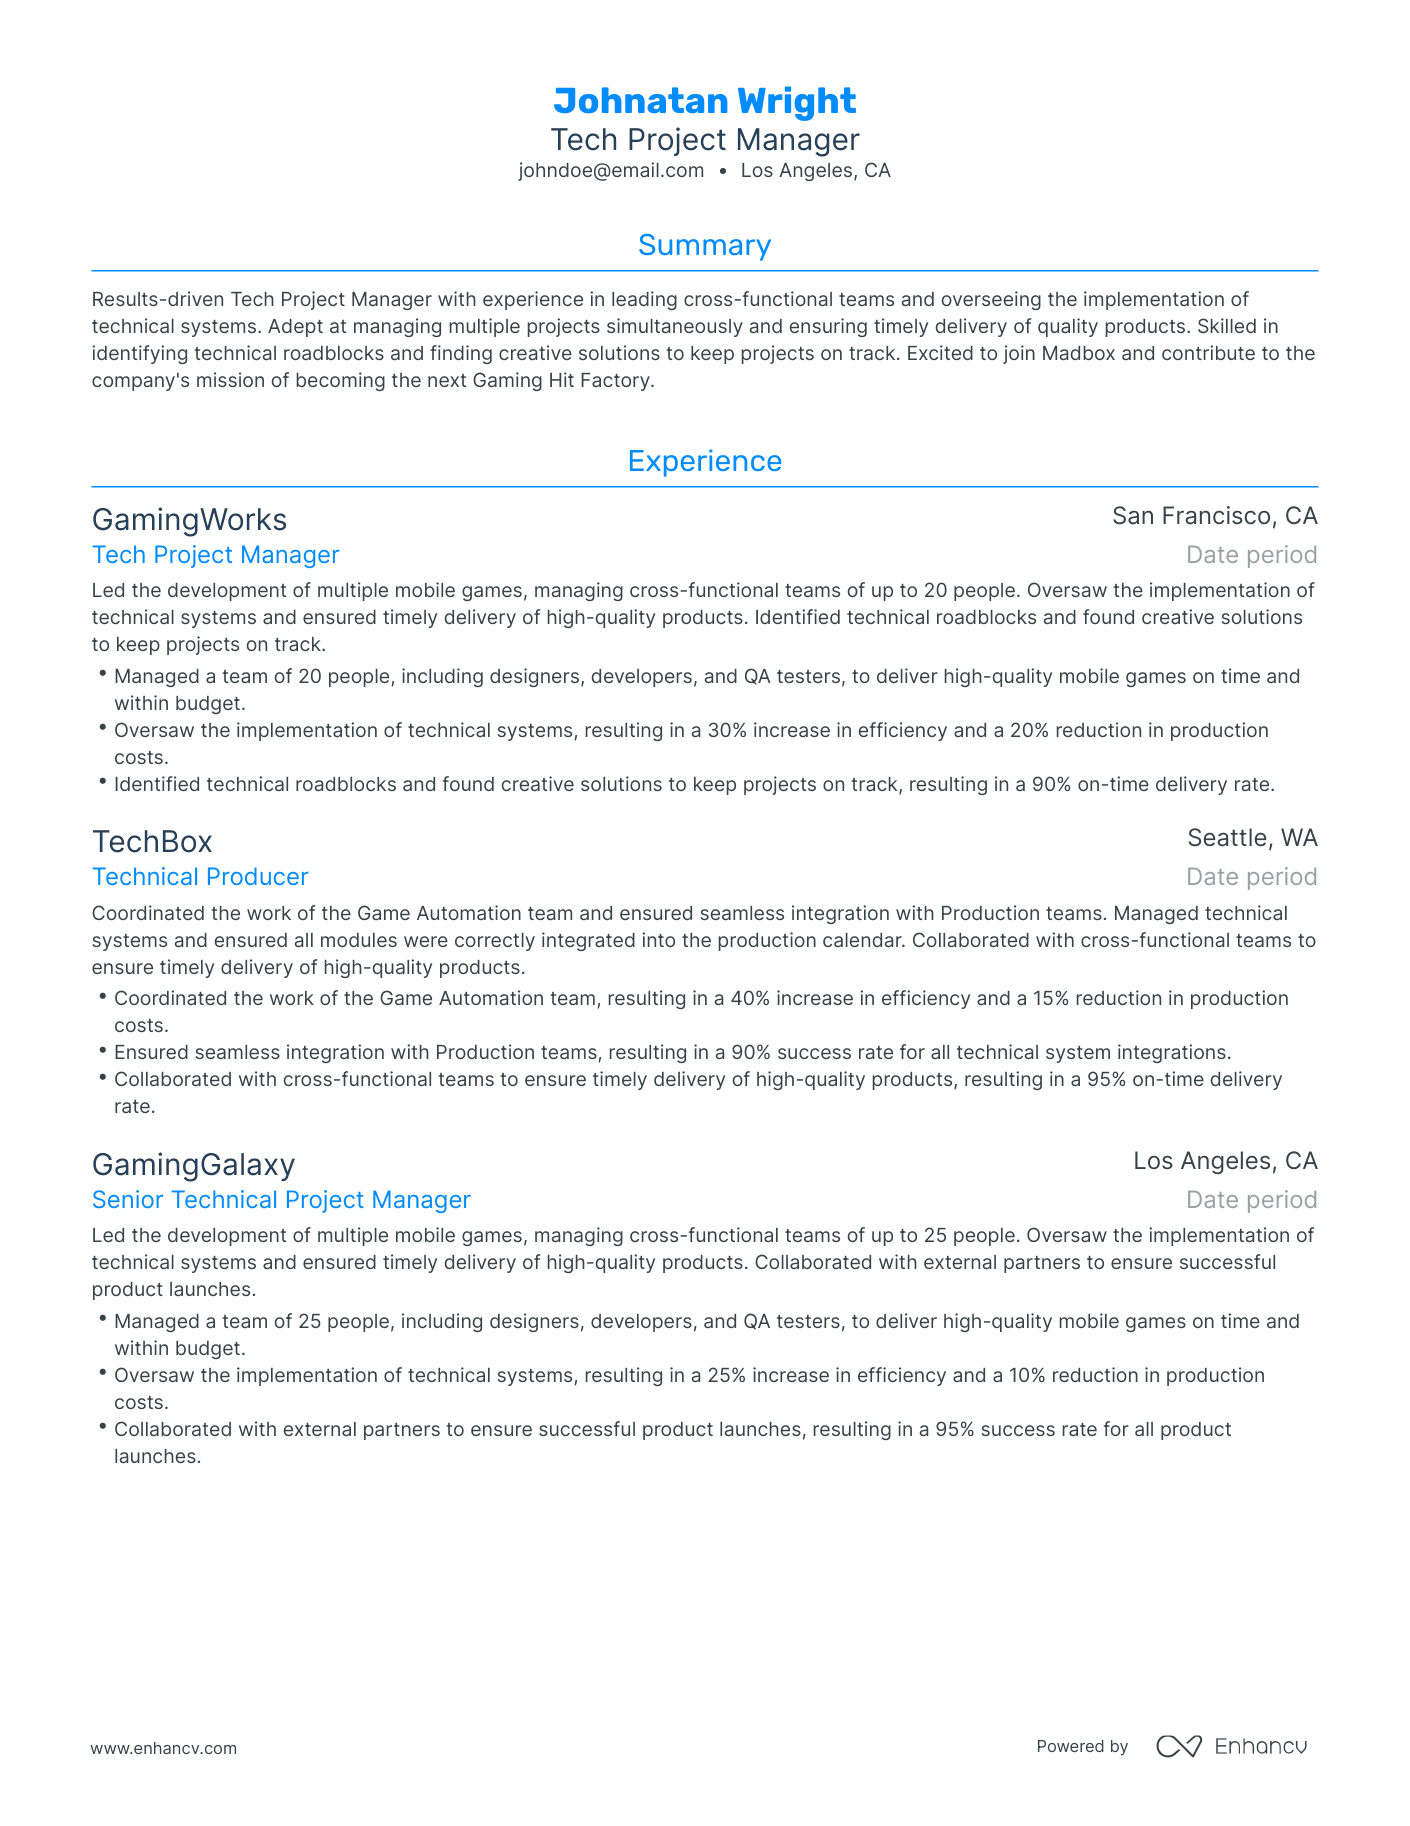 Traditional Tech Project Manager Resume Template